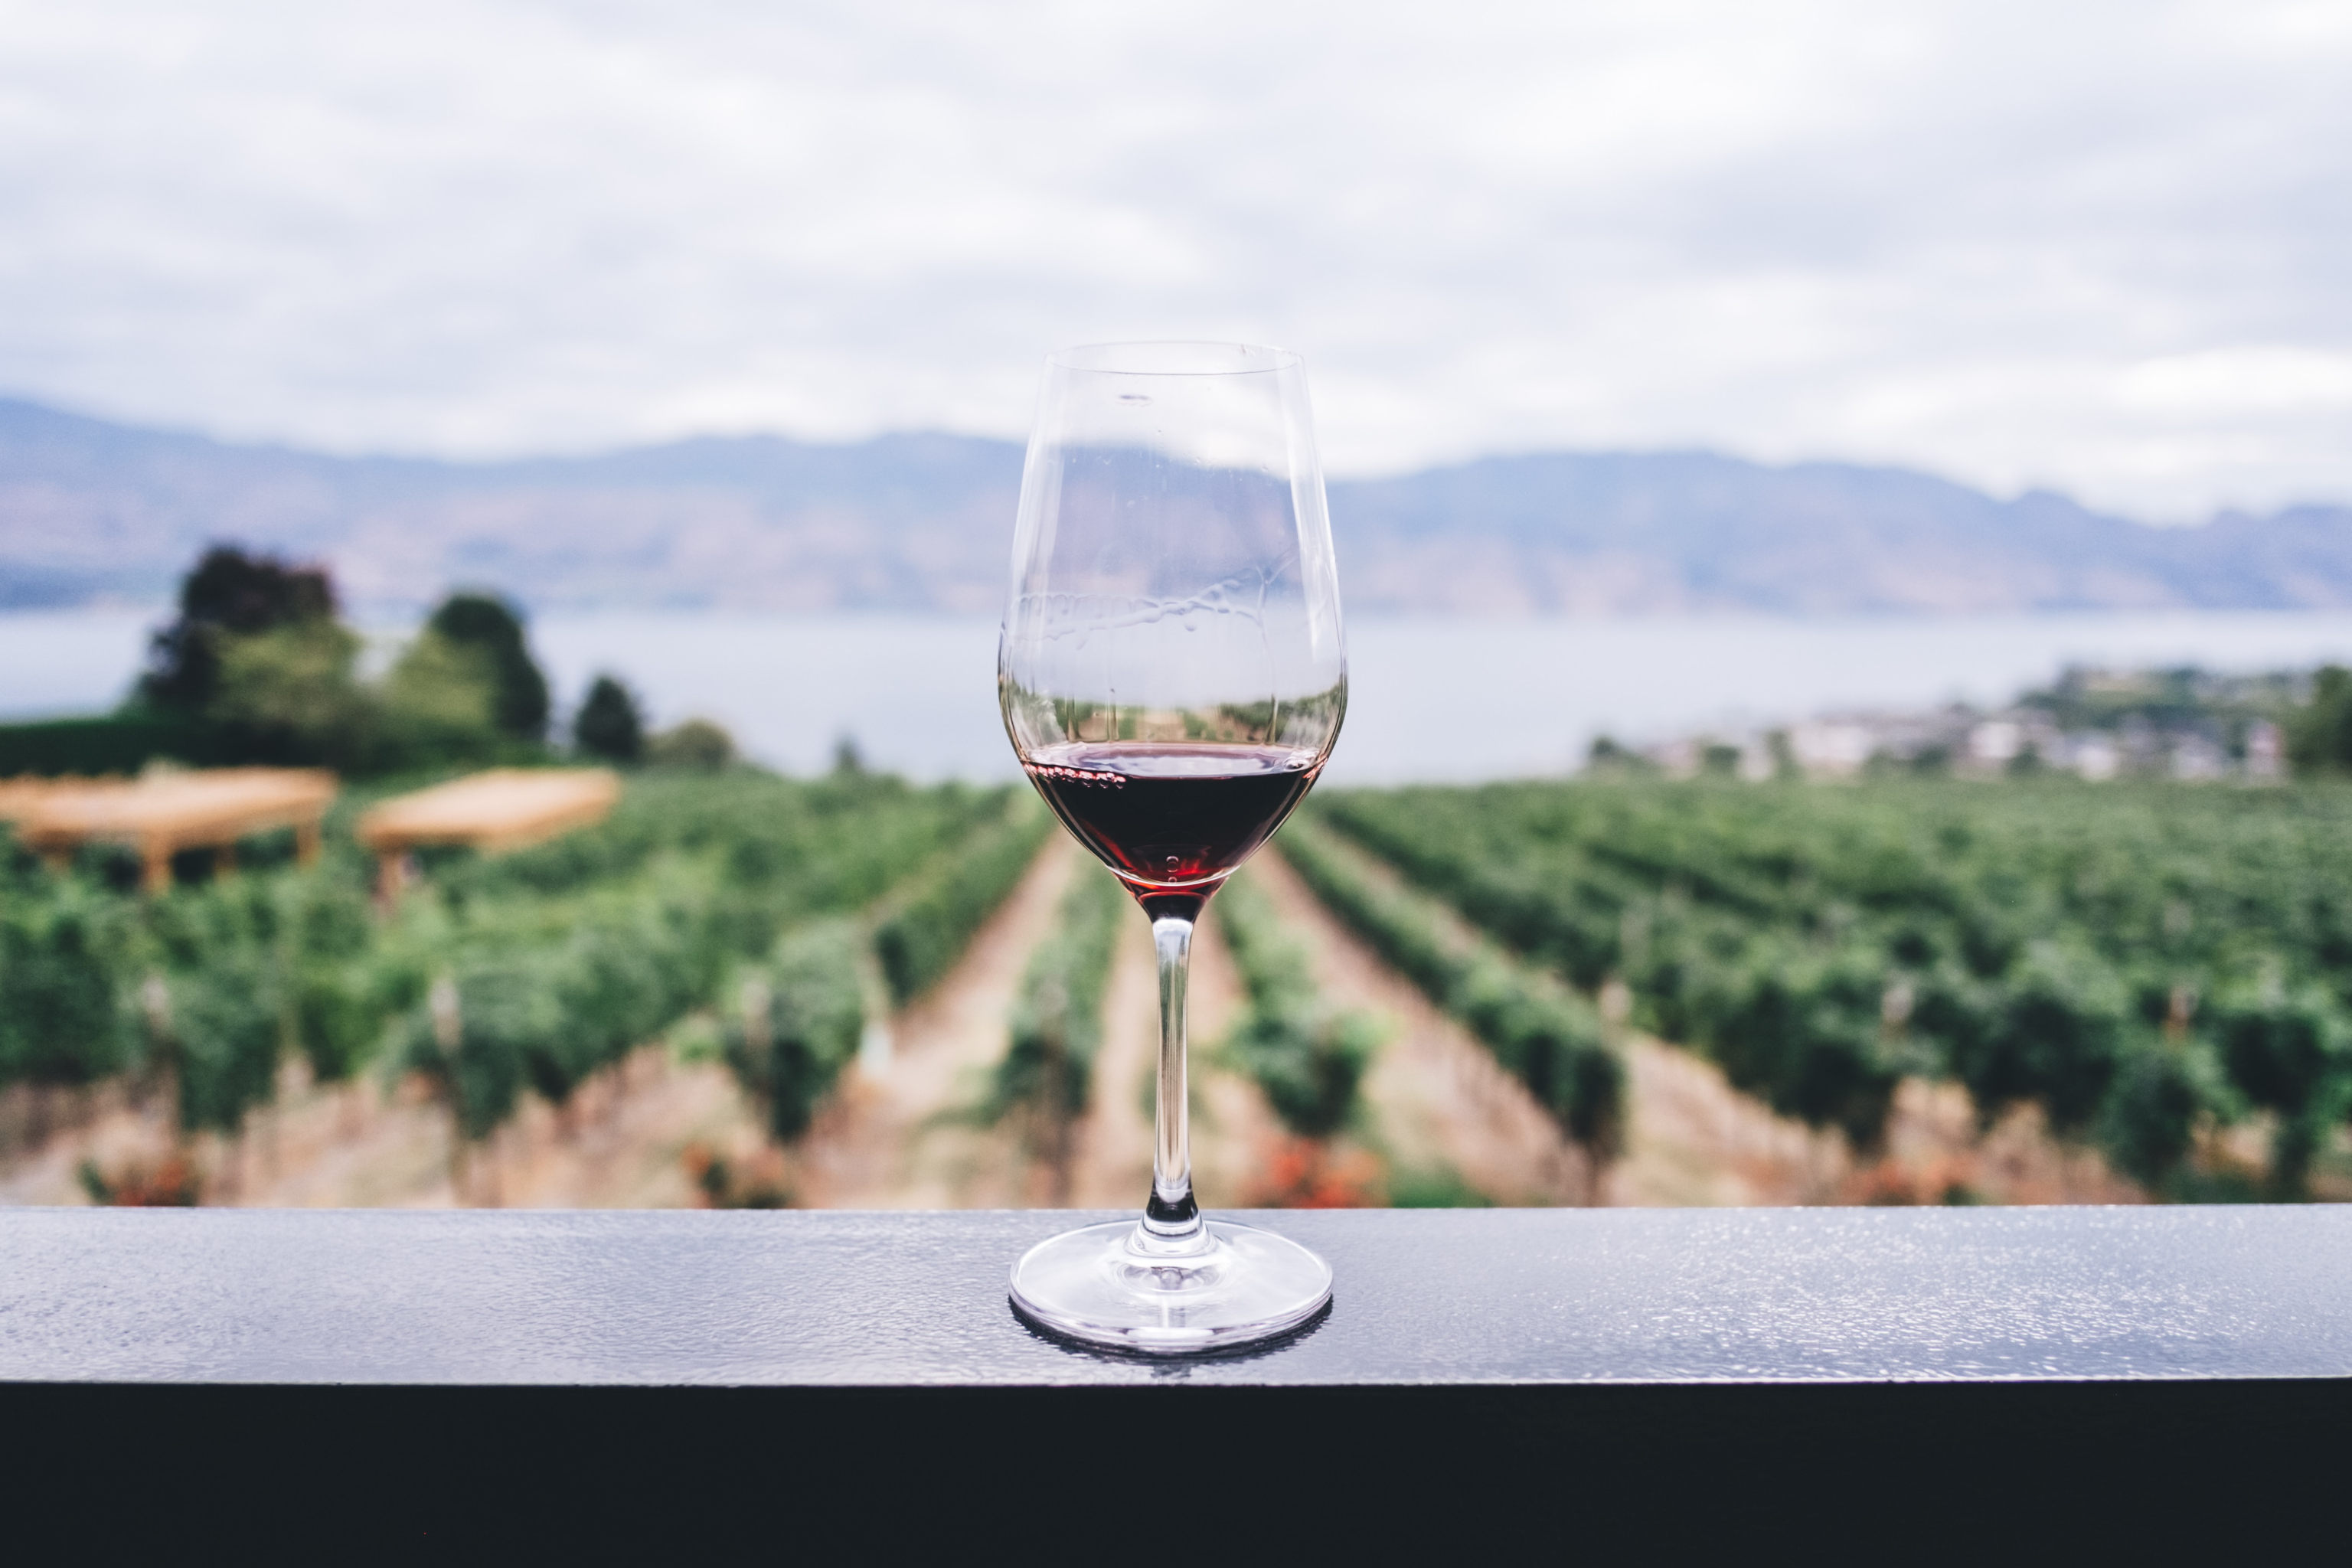 Winery from Unsplash